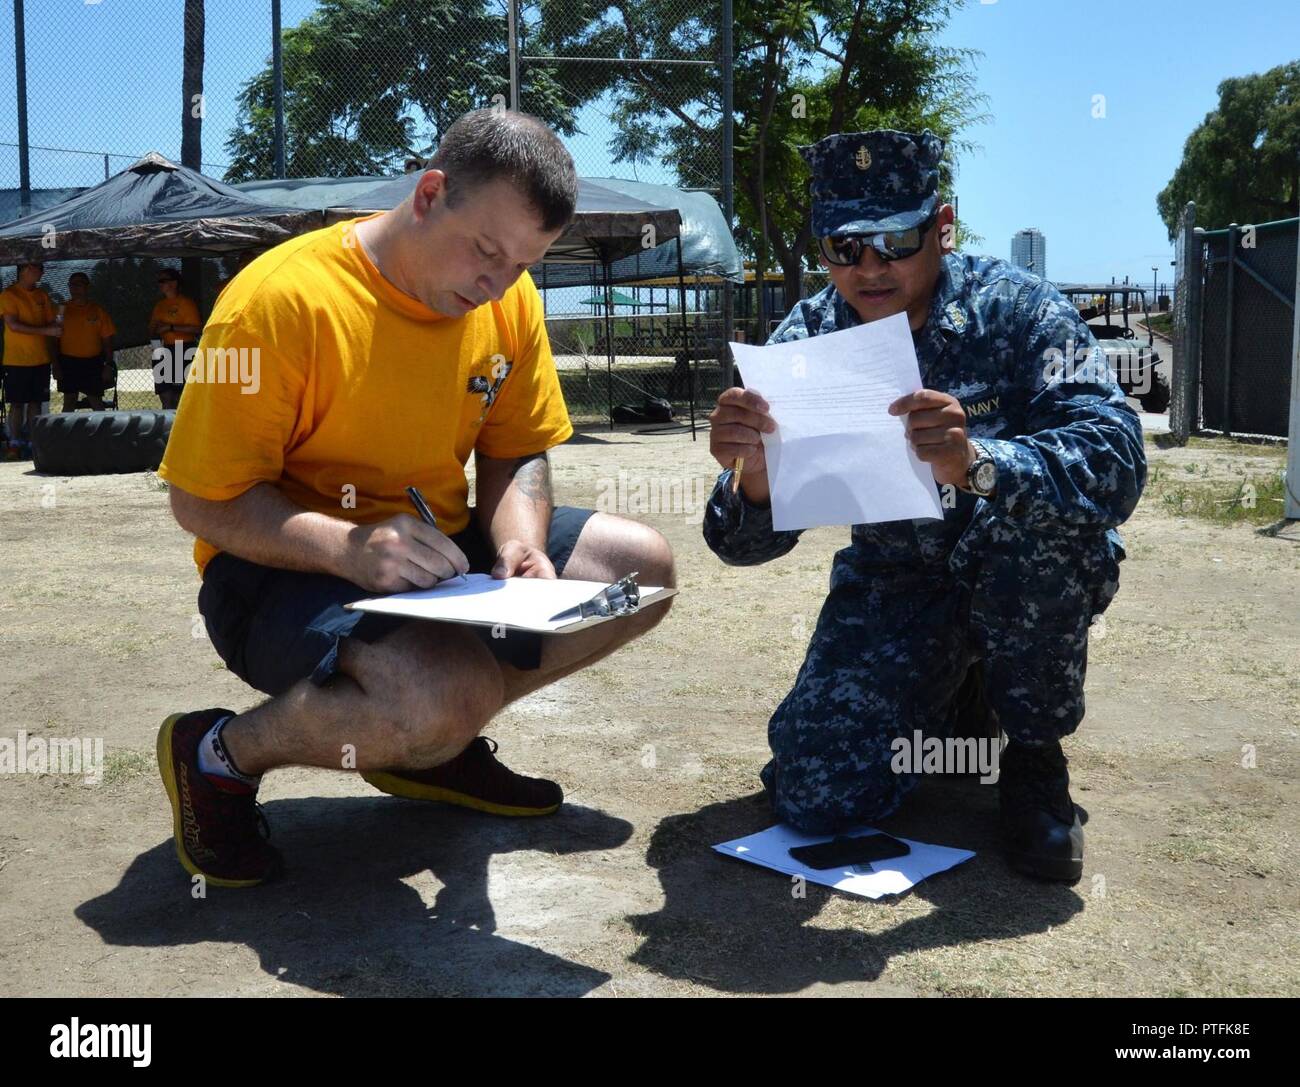 SAN DIEGO (July 21, 2017) Sailors assigned to Naval Medical Center San Diego compete to correctly identify the most rating badges at the CPO 365 Olympics July 20. The CPO 365 Olympics closed out of events and training for the first class petty officers before they are frocked to chief petty officer. Stock Photo